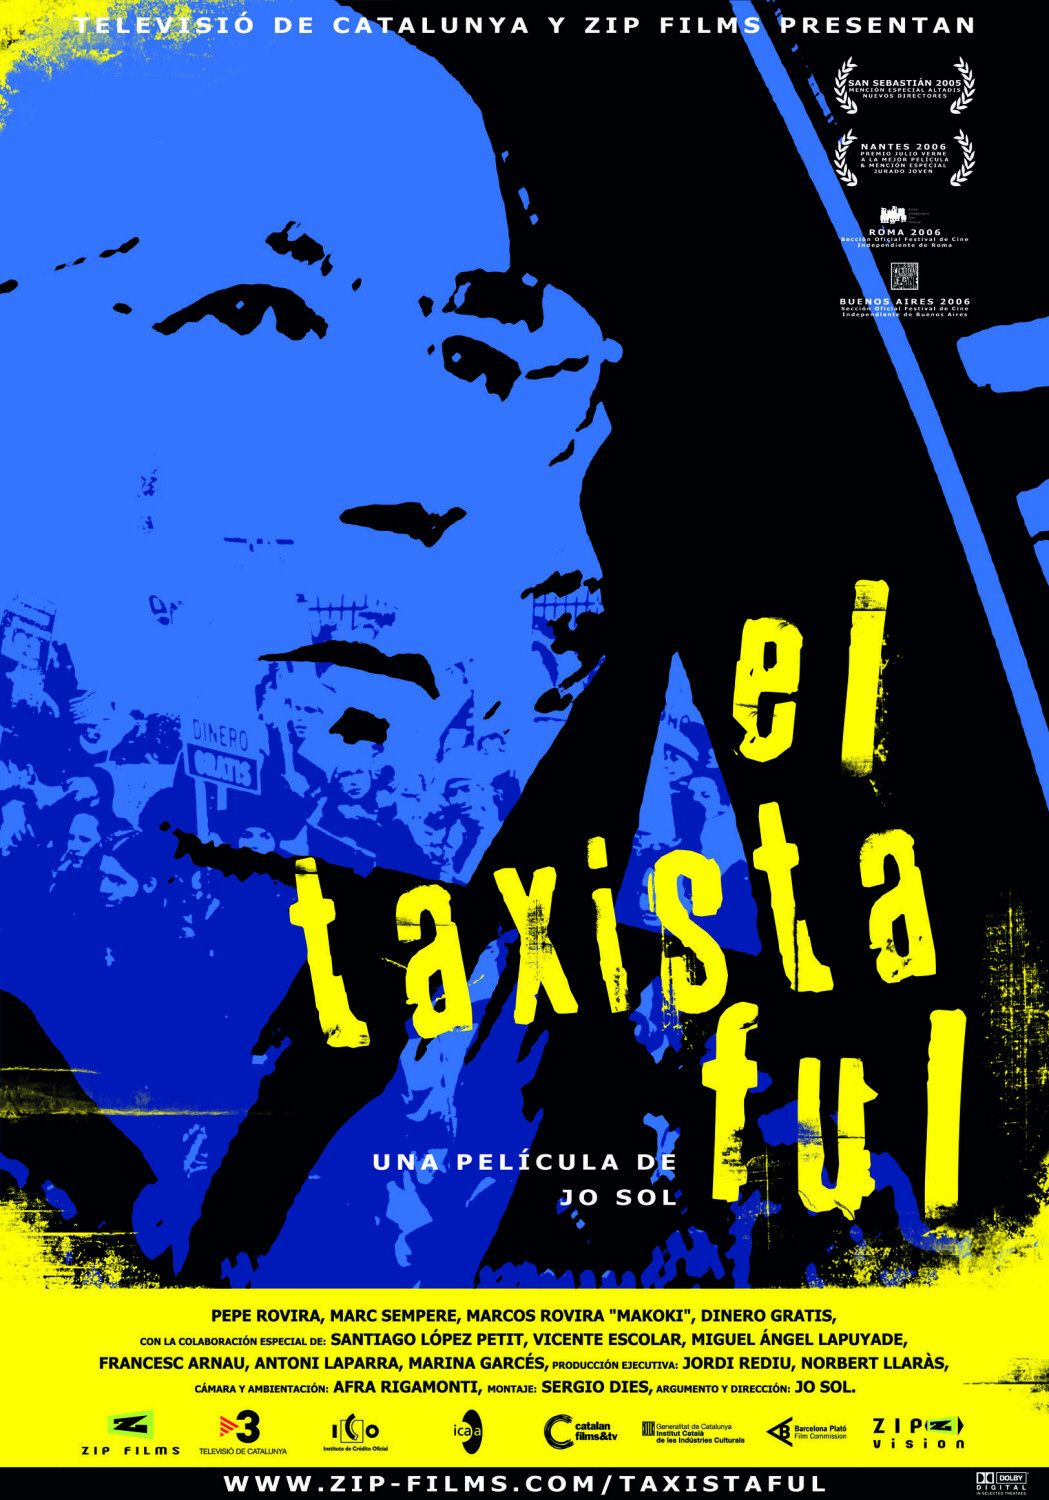 Extra Large Movie Poster Image for Taxista ful, El 